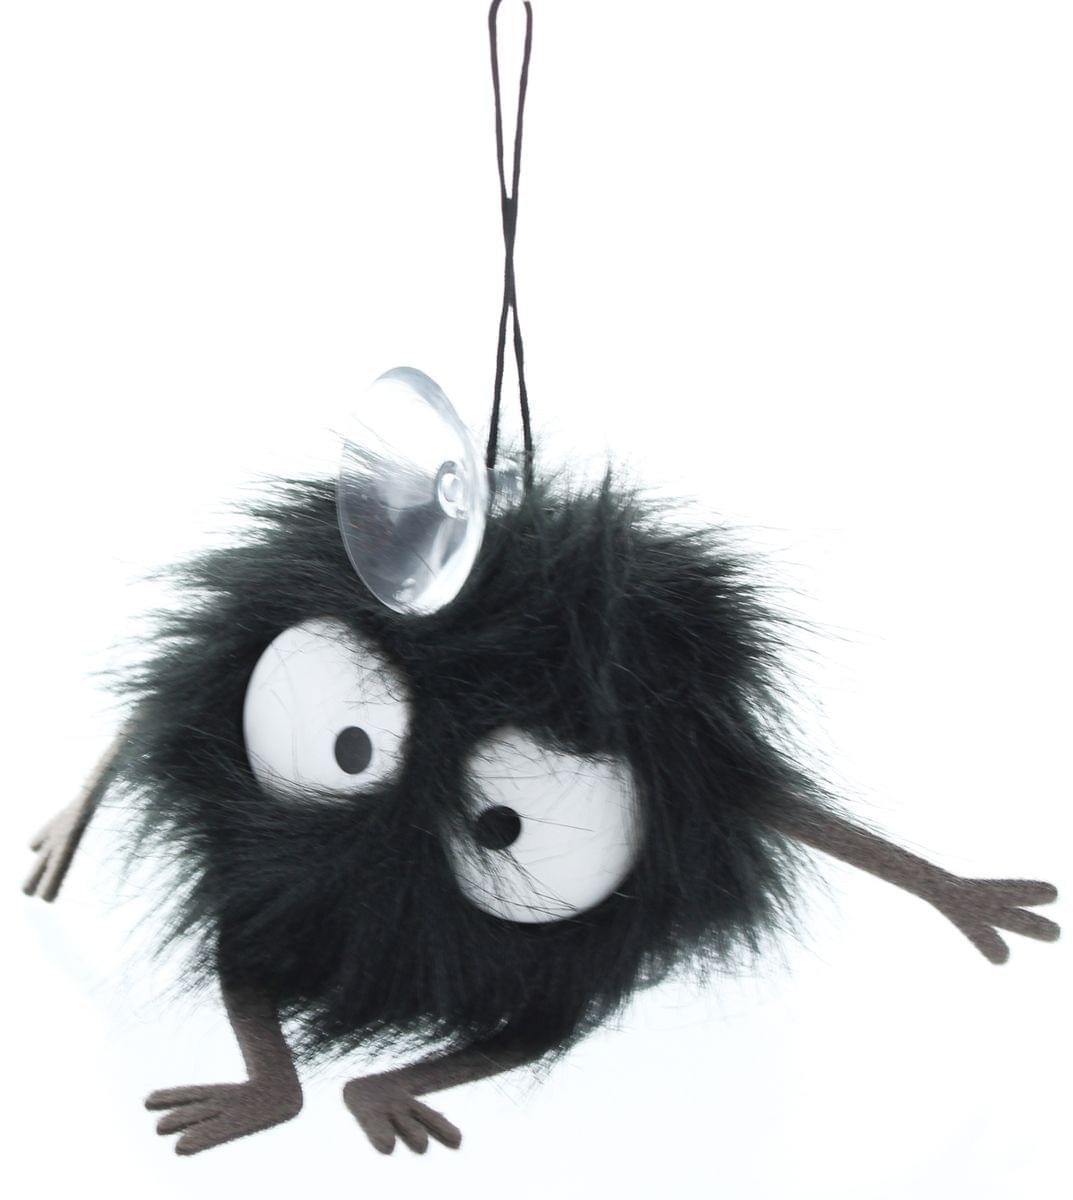 Spirited Away Soot Sprite 2" Cling Plush with Suction Cup